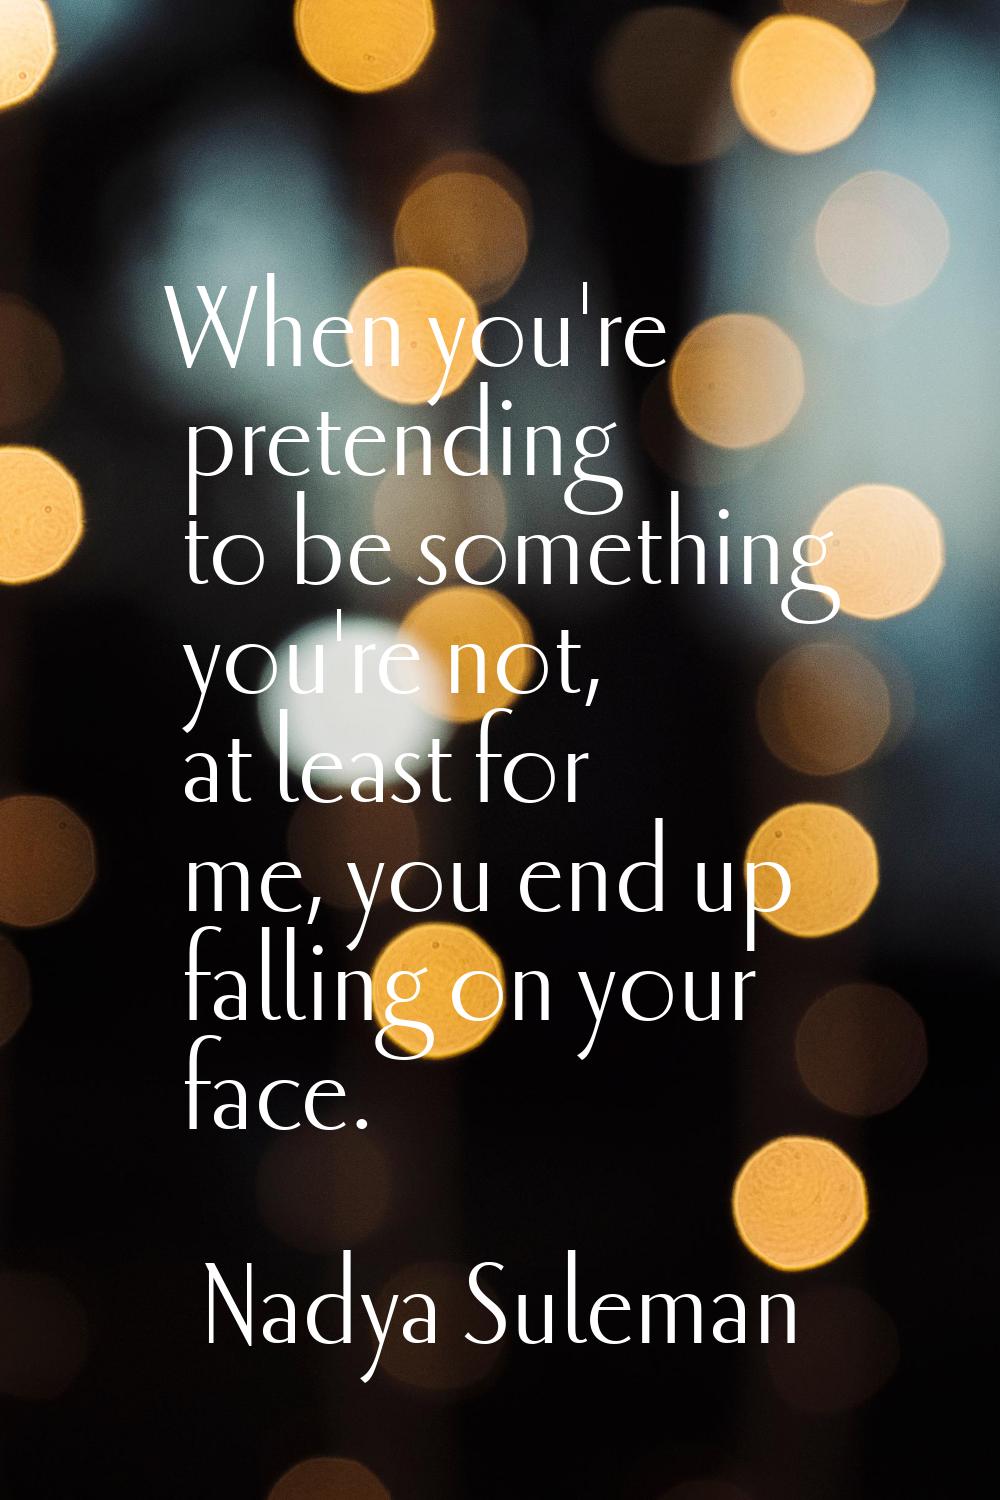 When you're pretending to be something you're not, at least for me, you end up falling on your face